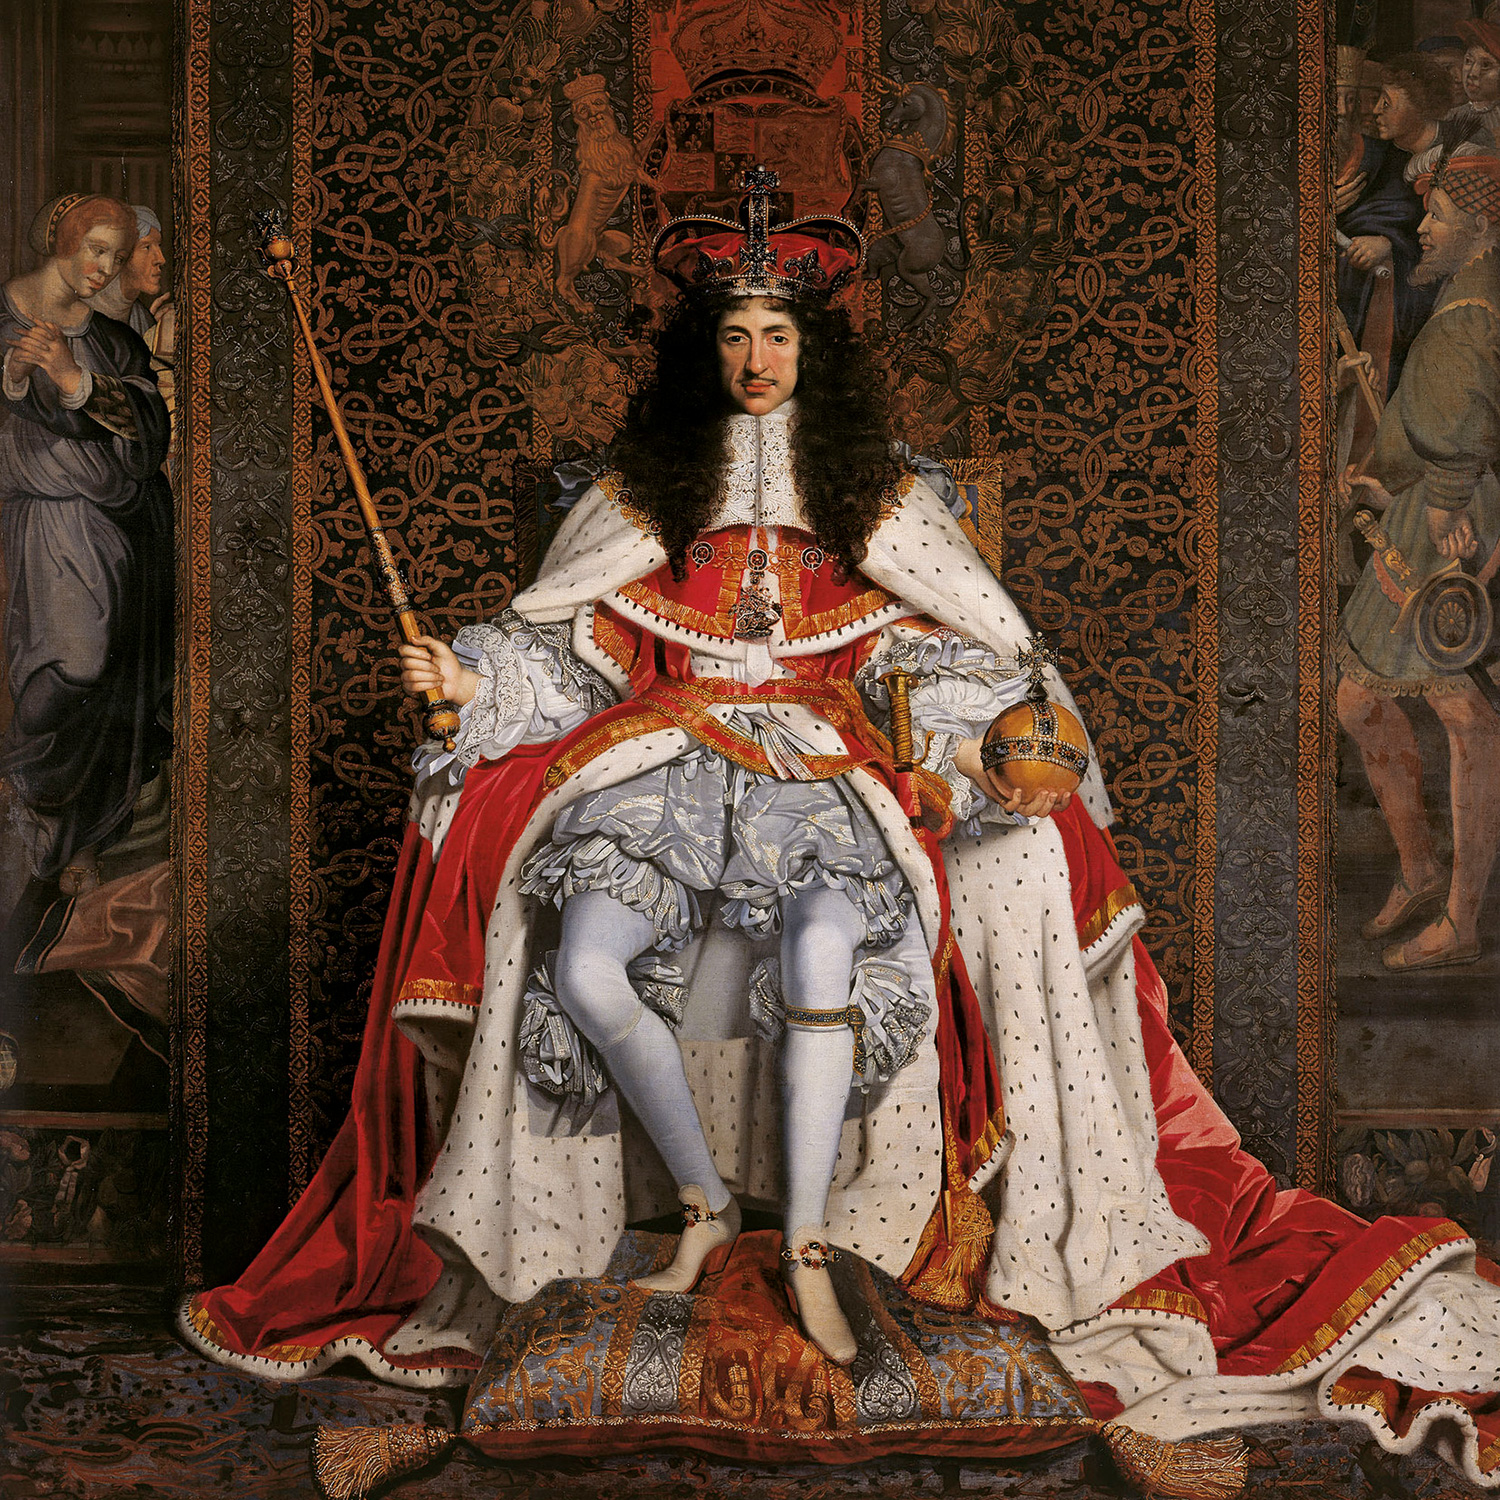 The characteristic features of the costume during the reign of Louis XIV.